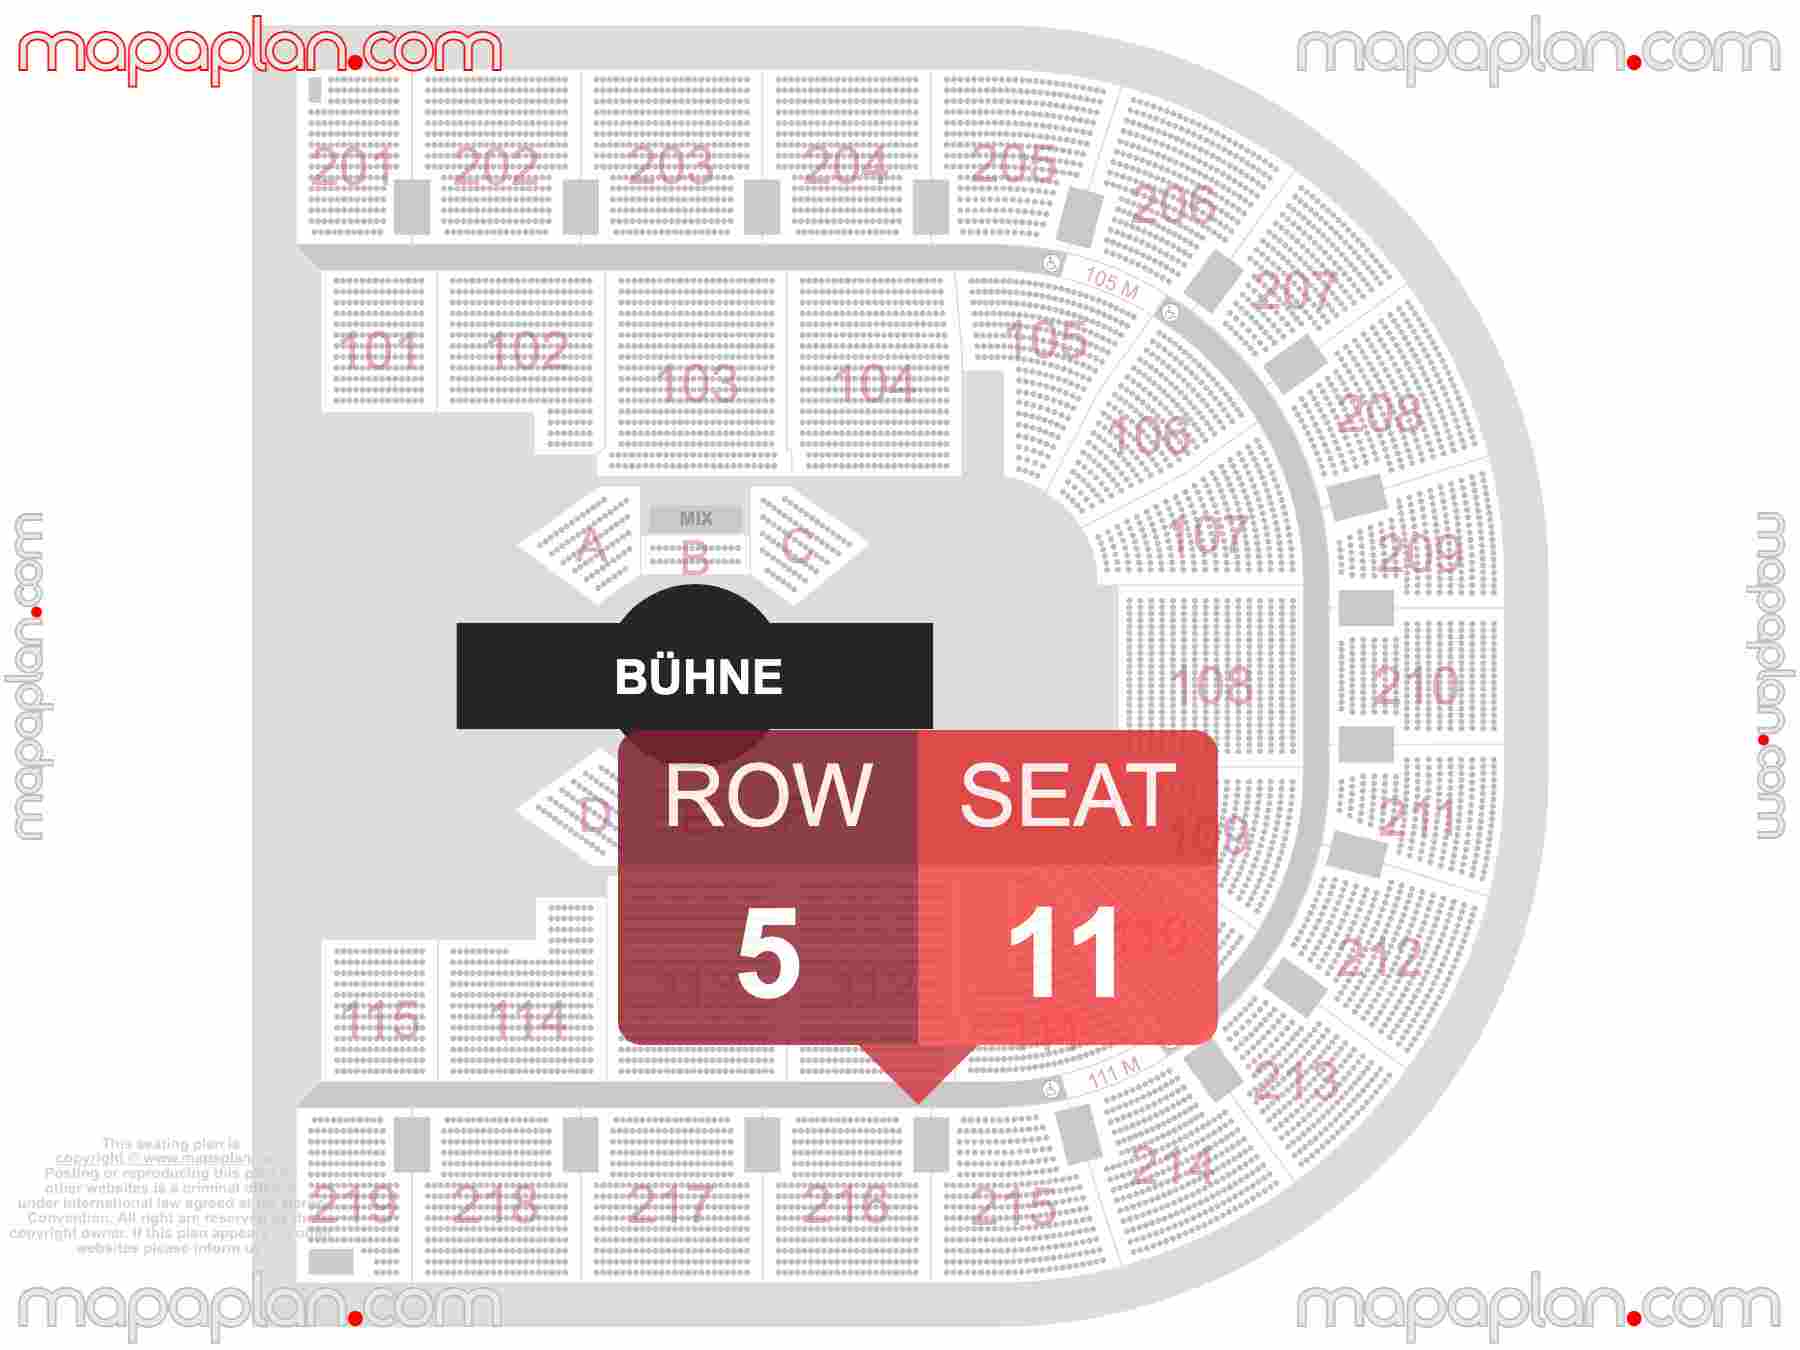 Oberhausen Rudolf Weber Arena seating plan Concerts 360 in the round stage 360 Innenraum Übersichtsplan mit Sitzplätze Numerierung & Reihen seating plan with exact section numbers showing best rows and seats selection 3d layout - Best interactive seat finder tool with precise detailed location data